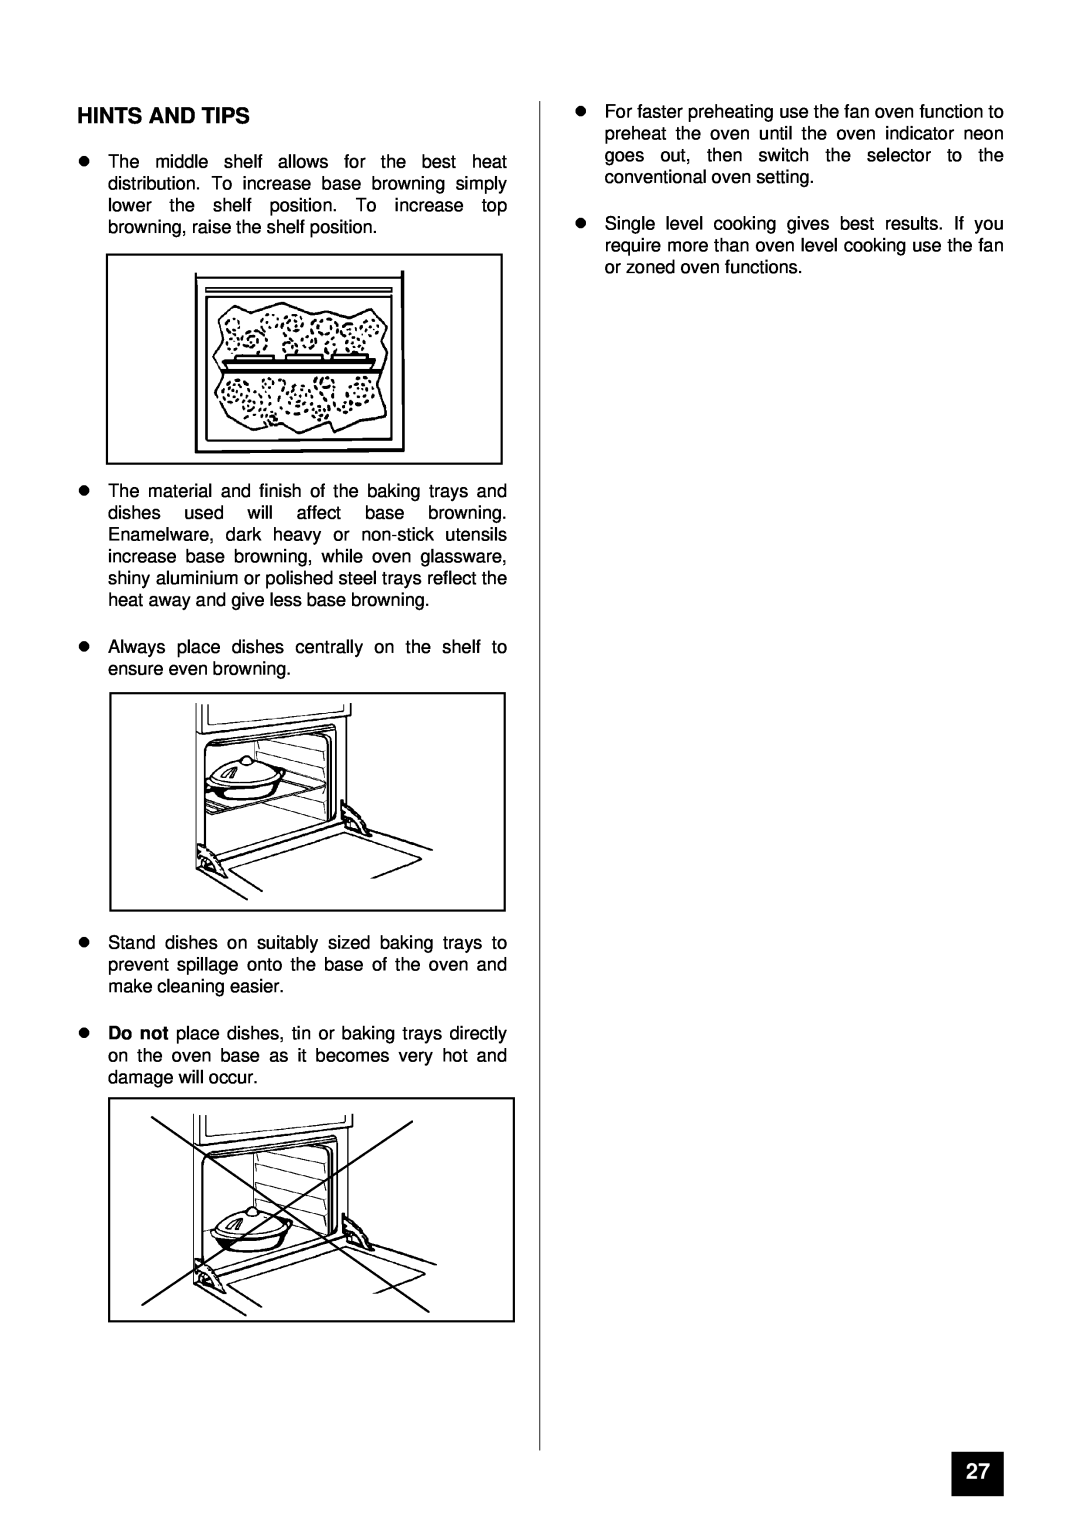 Tricity Bendix BD 921 installation instructions lHINTS AND TIPS, l browning, raise the shelf position 